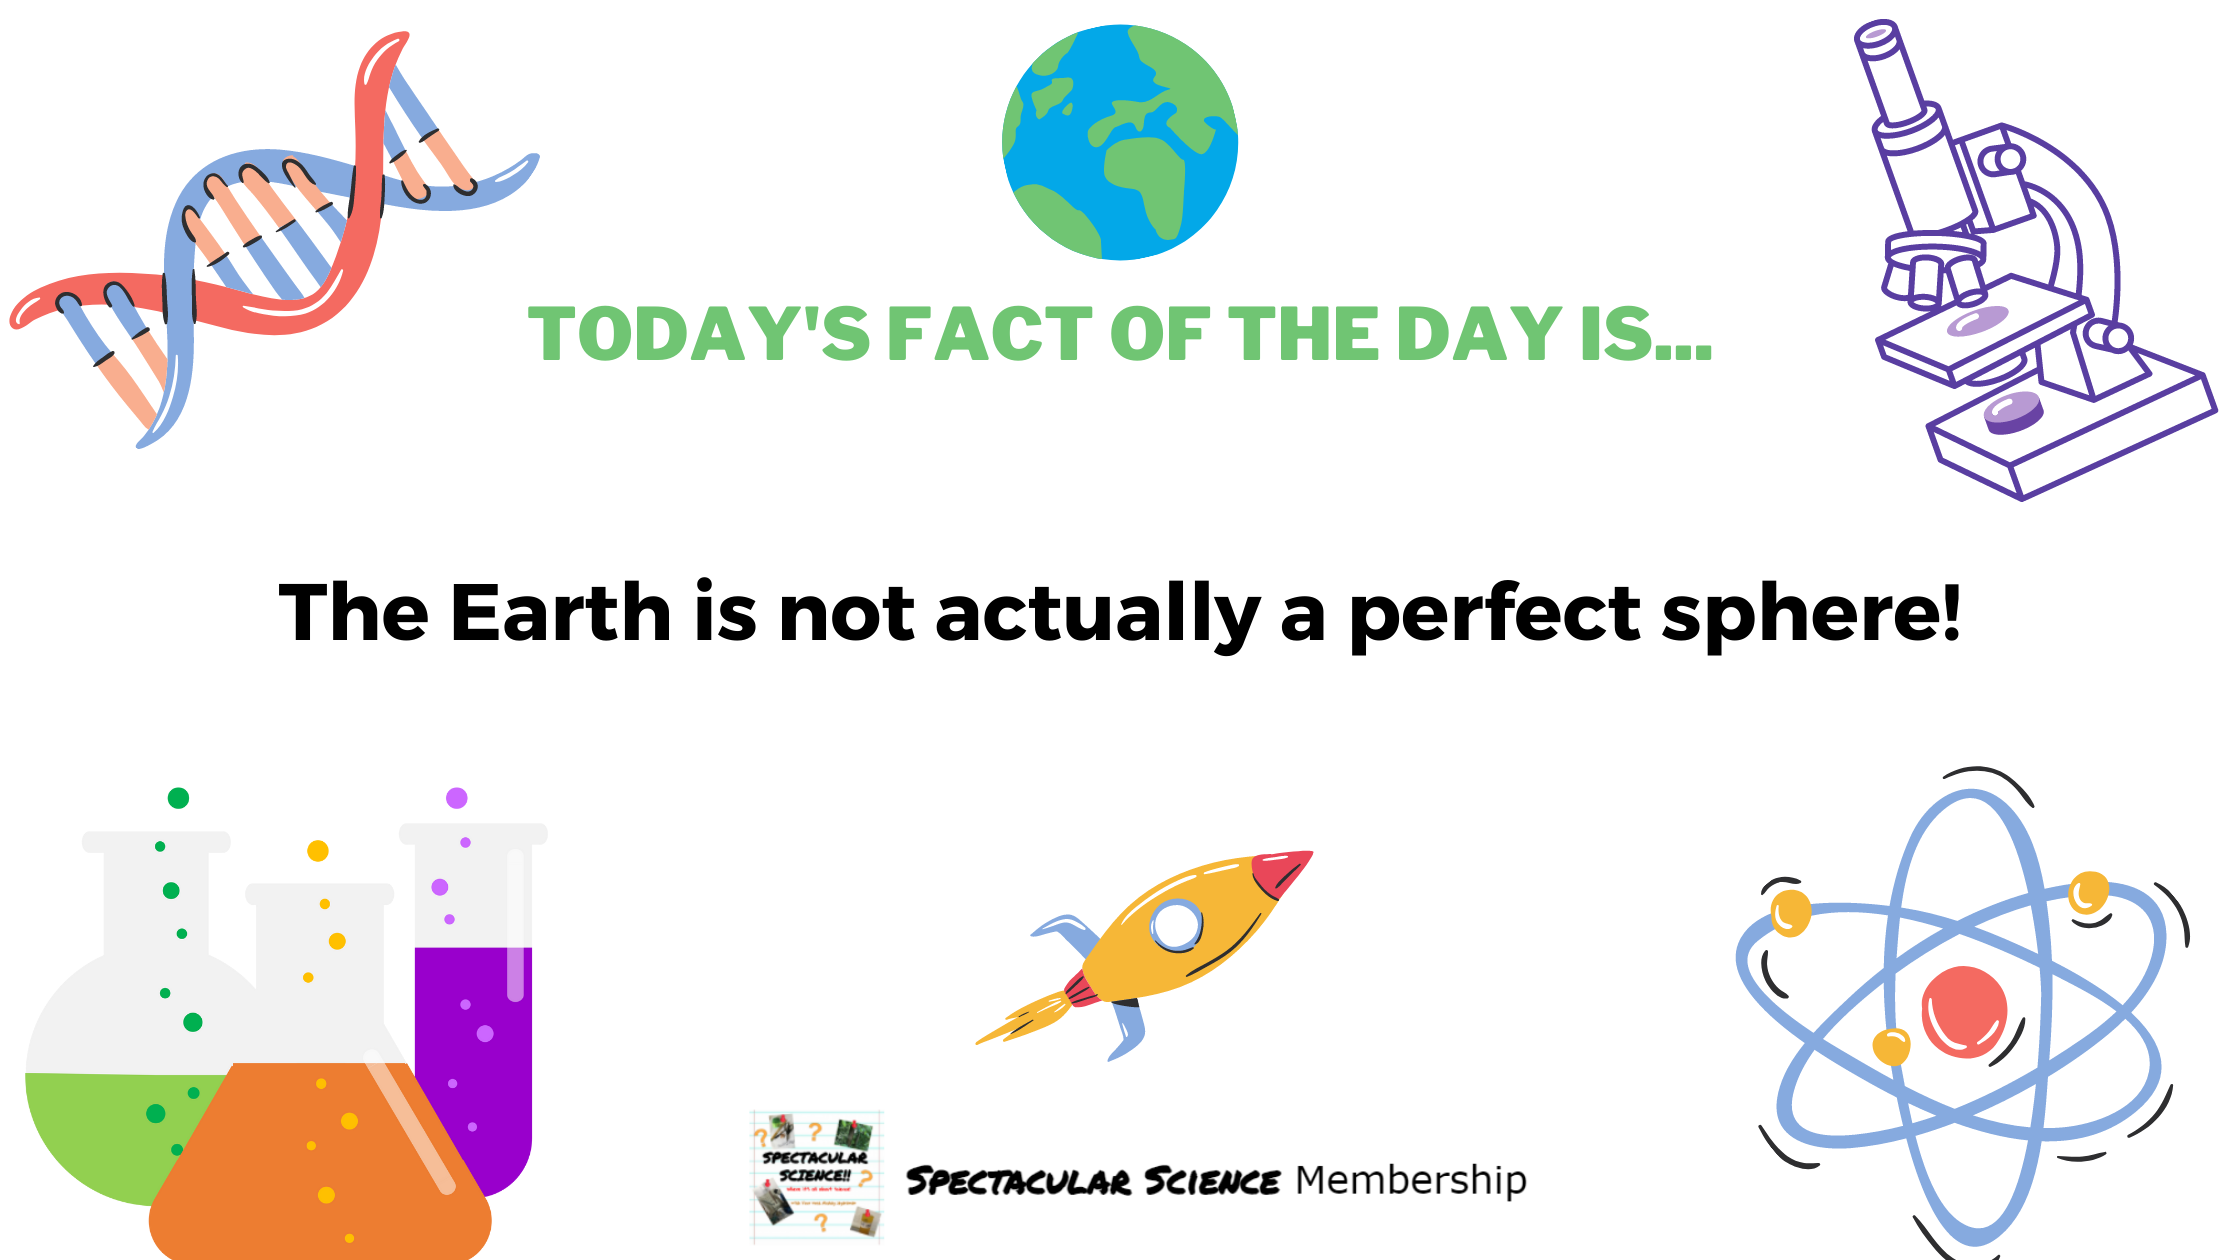 Fact of the Day Image Feb. 13th